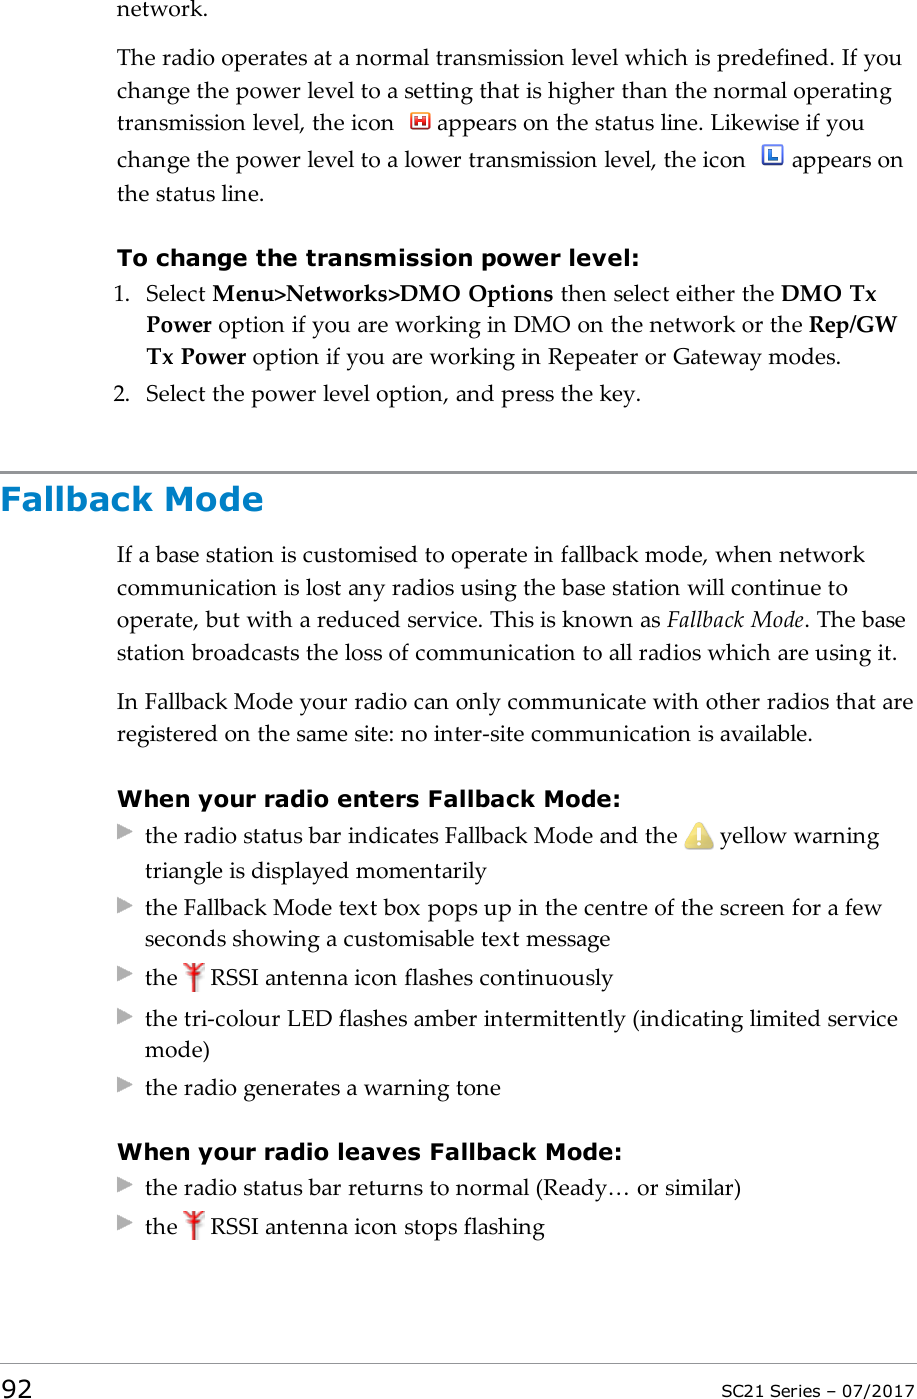 network.The radio operates at a normal transmission level which is predefined. If youchange the power level to a setting that is higher than the normal operatingtransmission level, the icon appears on the status line. Likewise if youchange the power level to a lower transmission level, the icon appears onthe status line.To change the transmission power level:1. Select Menu&gt;Networks&gt;DMO Options then select either the DMO TxPower option if you are working in DMO on the network or the Rep/GWTx Power option if you are working in Repeater or Gateway modes.2. Select the power level option, and press the key.Fallback ModeIf a base station is customised to operate in fallback mode, when networkcommunication is lost any radios using the base station will continue tooperate, but with a reduced service. This is known as Fallback Mode. The basestation broadcasts the loss of communication to all radios which are using it.In Fallback Mode your radio can only communicate with other radios that areregistered on the same site: no inter-site communication is available.When your radio enters Fallback Mode:the radio status bar indicates Fallback Mode and the yellow warningtriangle is displayed momentarilythe Fallback Mode text box pops up in the centre of the screen for a fewseconds showing a customisable text messagethe RSSI antenna icon flashes continuouslythe tri-colour LED flashes amber intermittently (indicating limited servicemode)the radio generates a warning toneWhen your radio leaves Fallback Mode:the radio status bar returns to normal (Ready… or similar)the RSSI antenna icon stops flashing92 SC21 Series – 07/2017